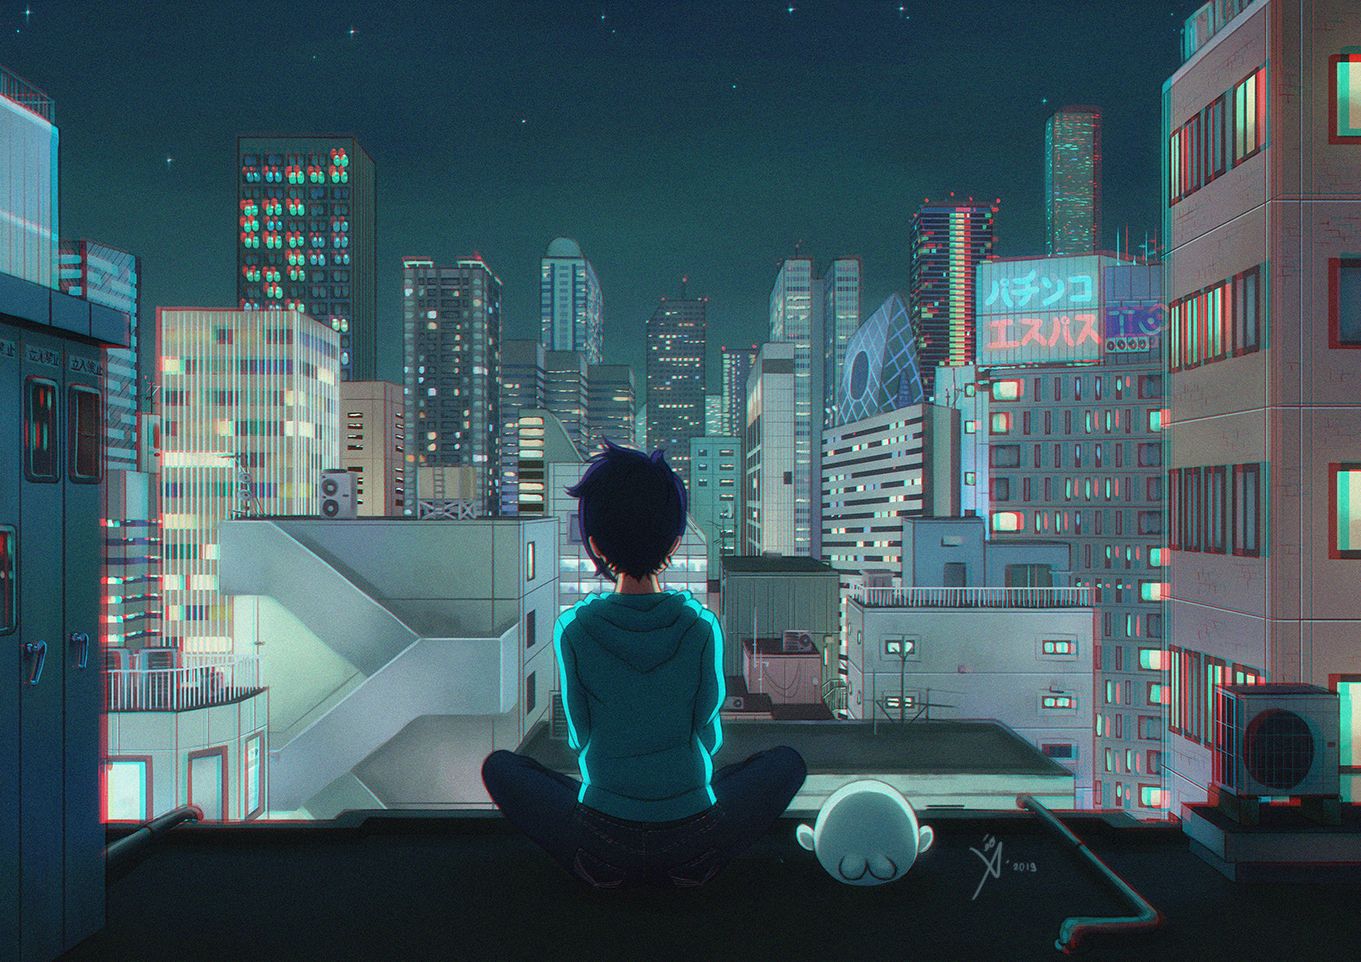 Umi Rooftops Anime Cityscape Anime Girls Building Lights Night Wallpaper -  Resolution:1361x962 - ID:1352812 